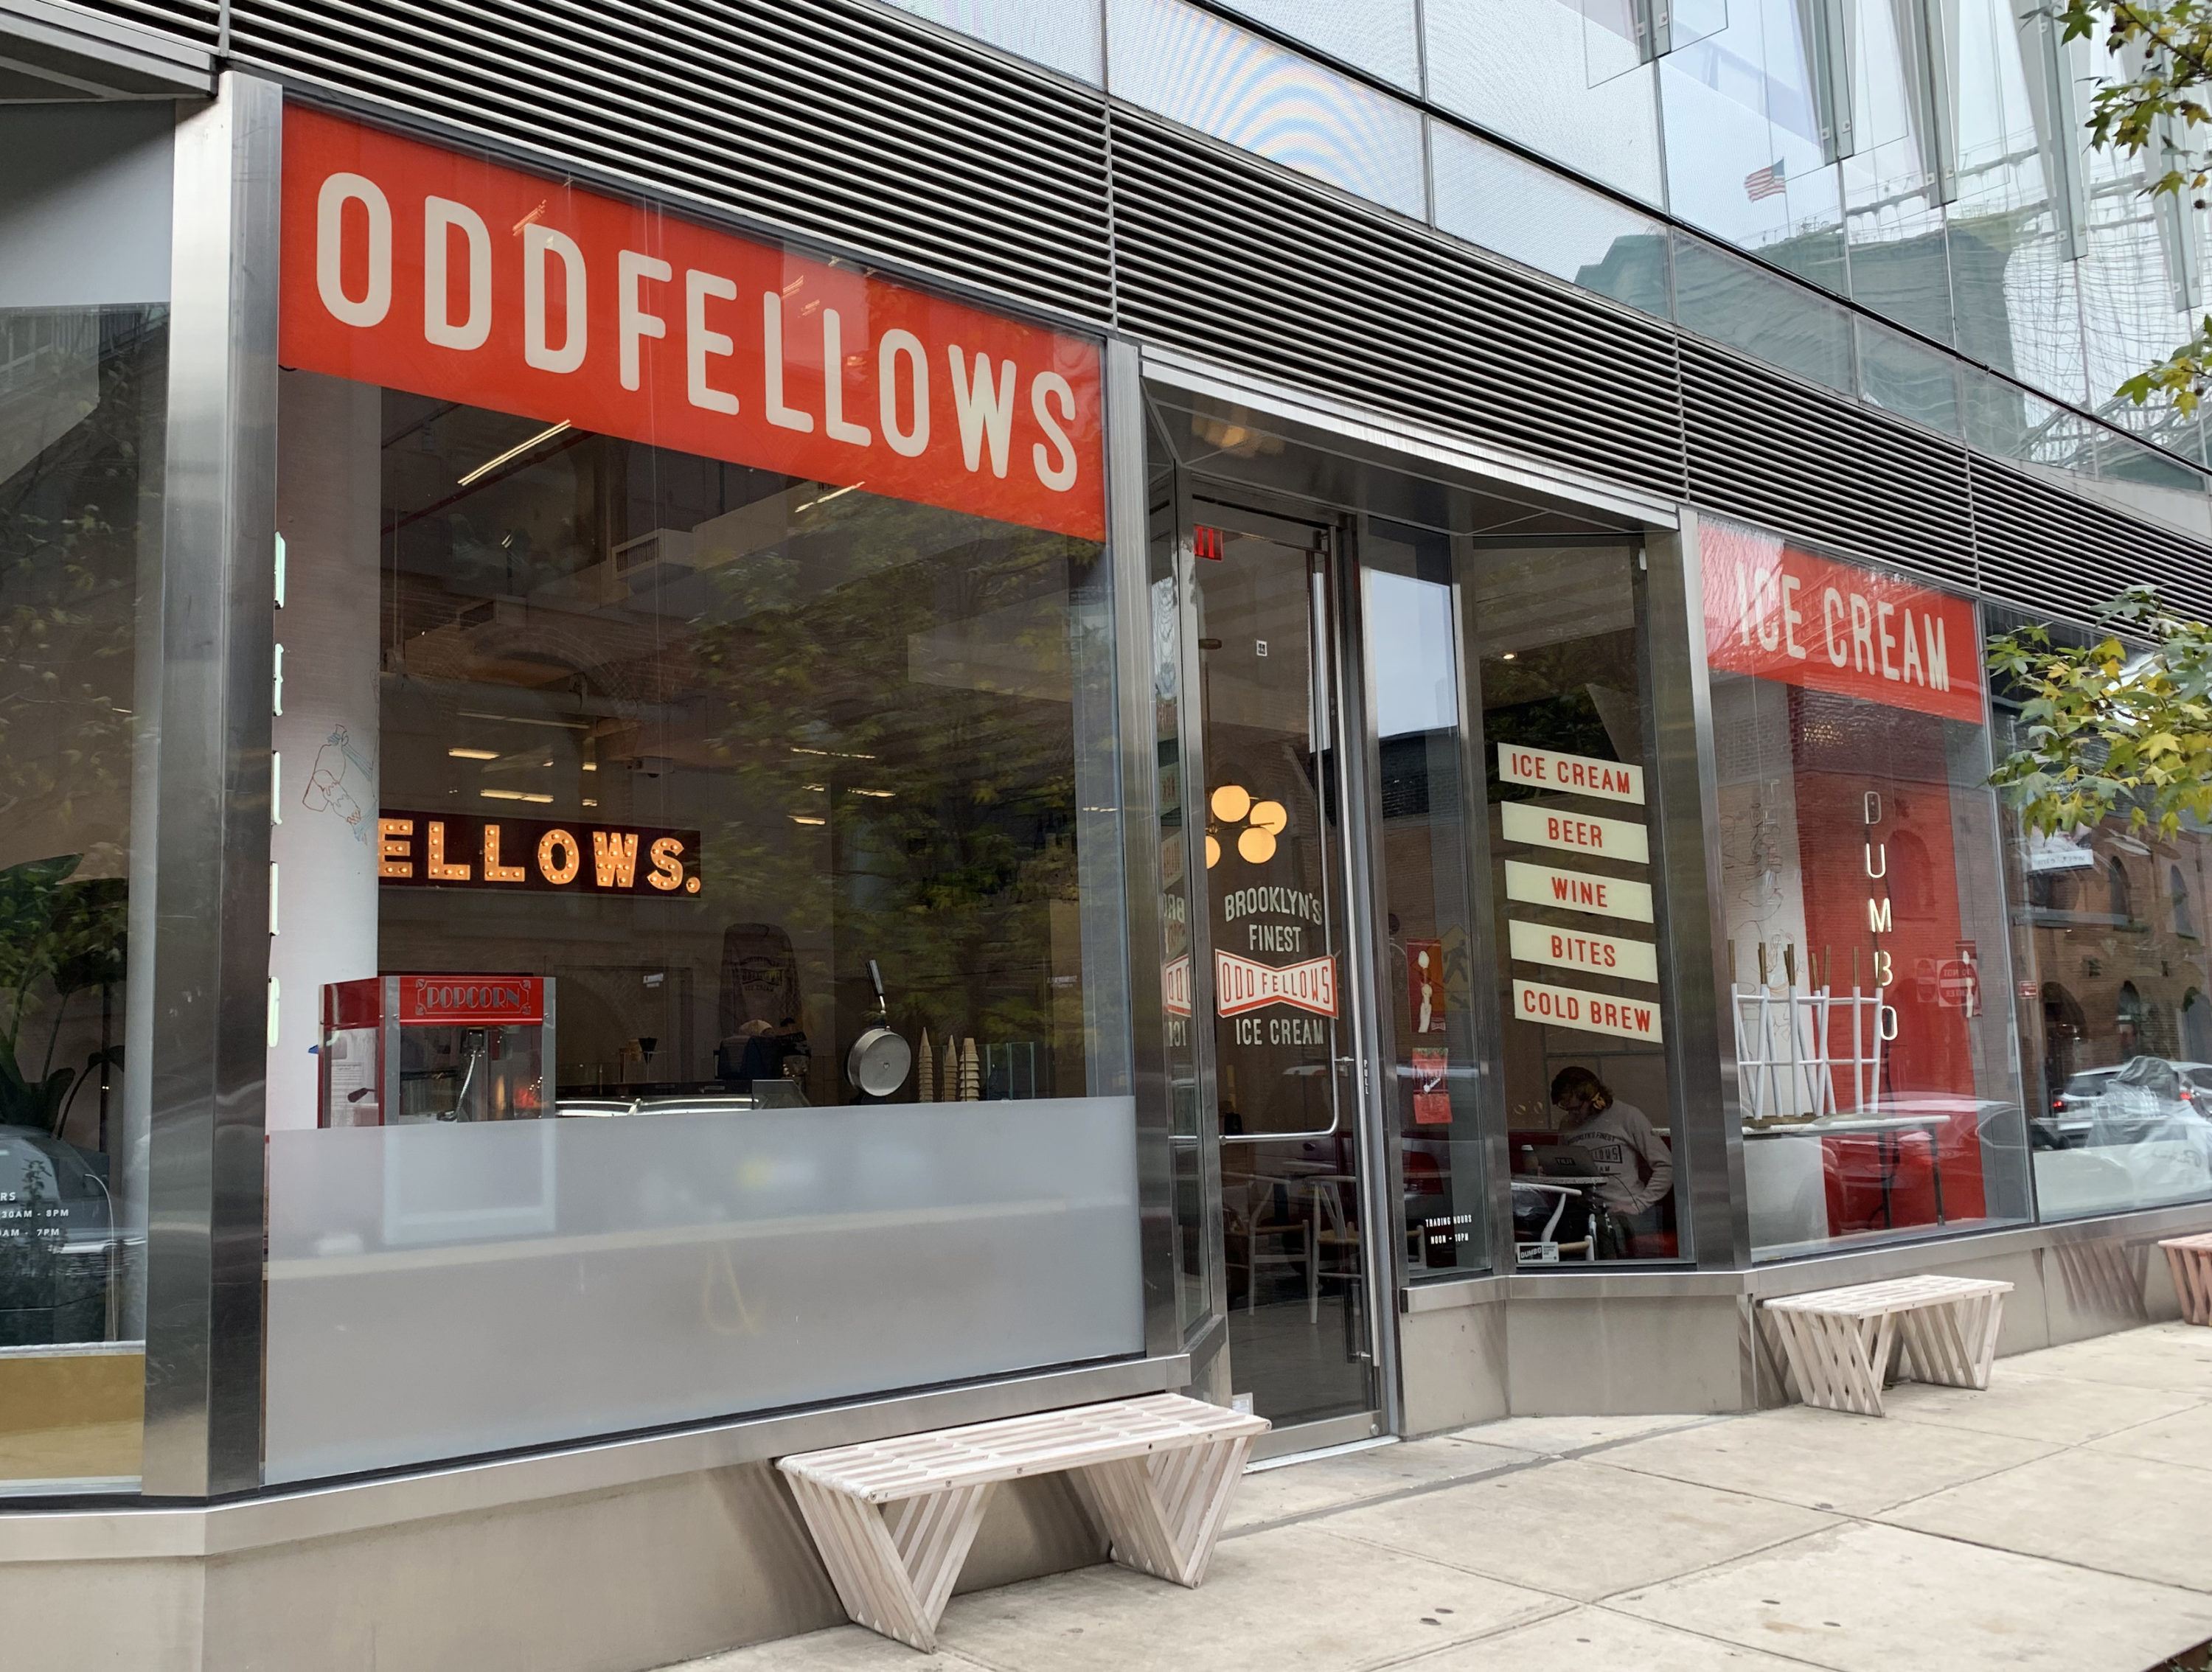 OddFellows Ice Cream Co. will be bringing its iced delights to Pier 5 in Brooklyn Bridge Park. Shown above is their Water Street shop in DUMBO. Photo: Mary Frost / Brooklyn Eagle